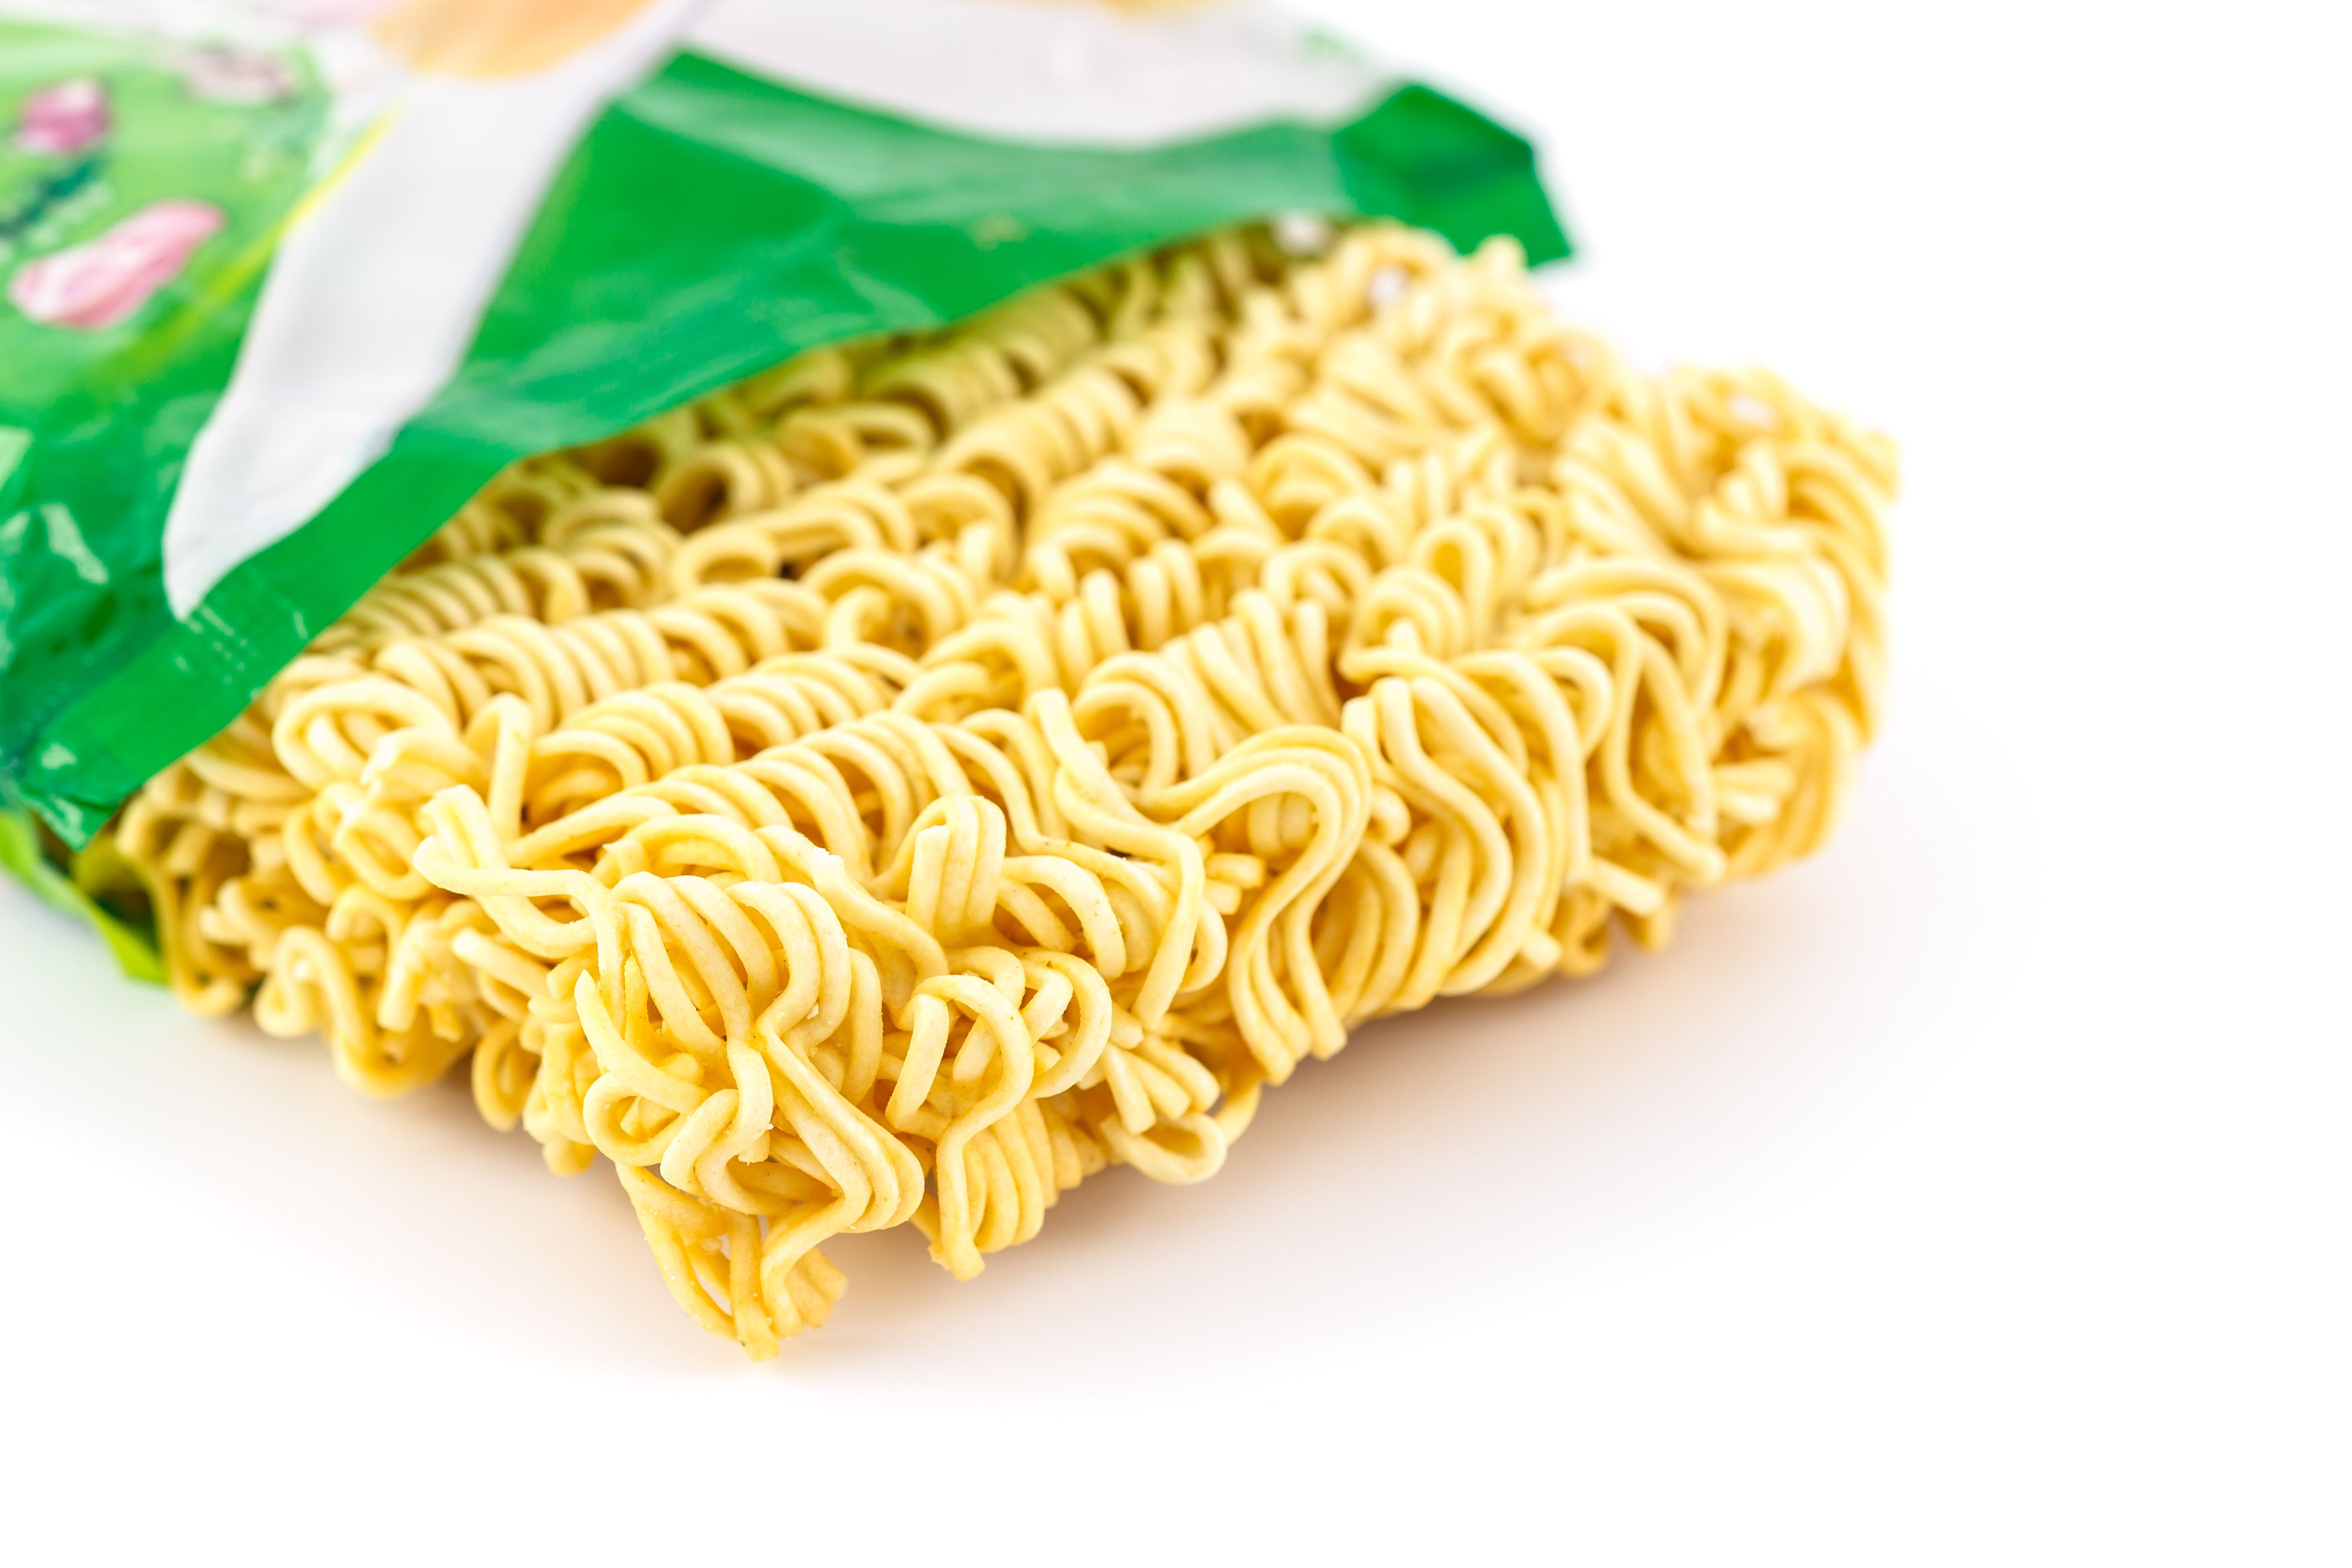 Why You Should Eat Top Ramen - Why Instant Ramen Is Bad